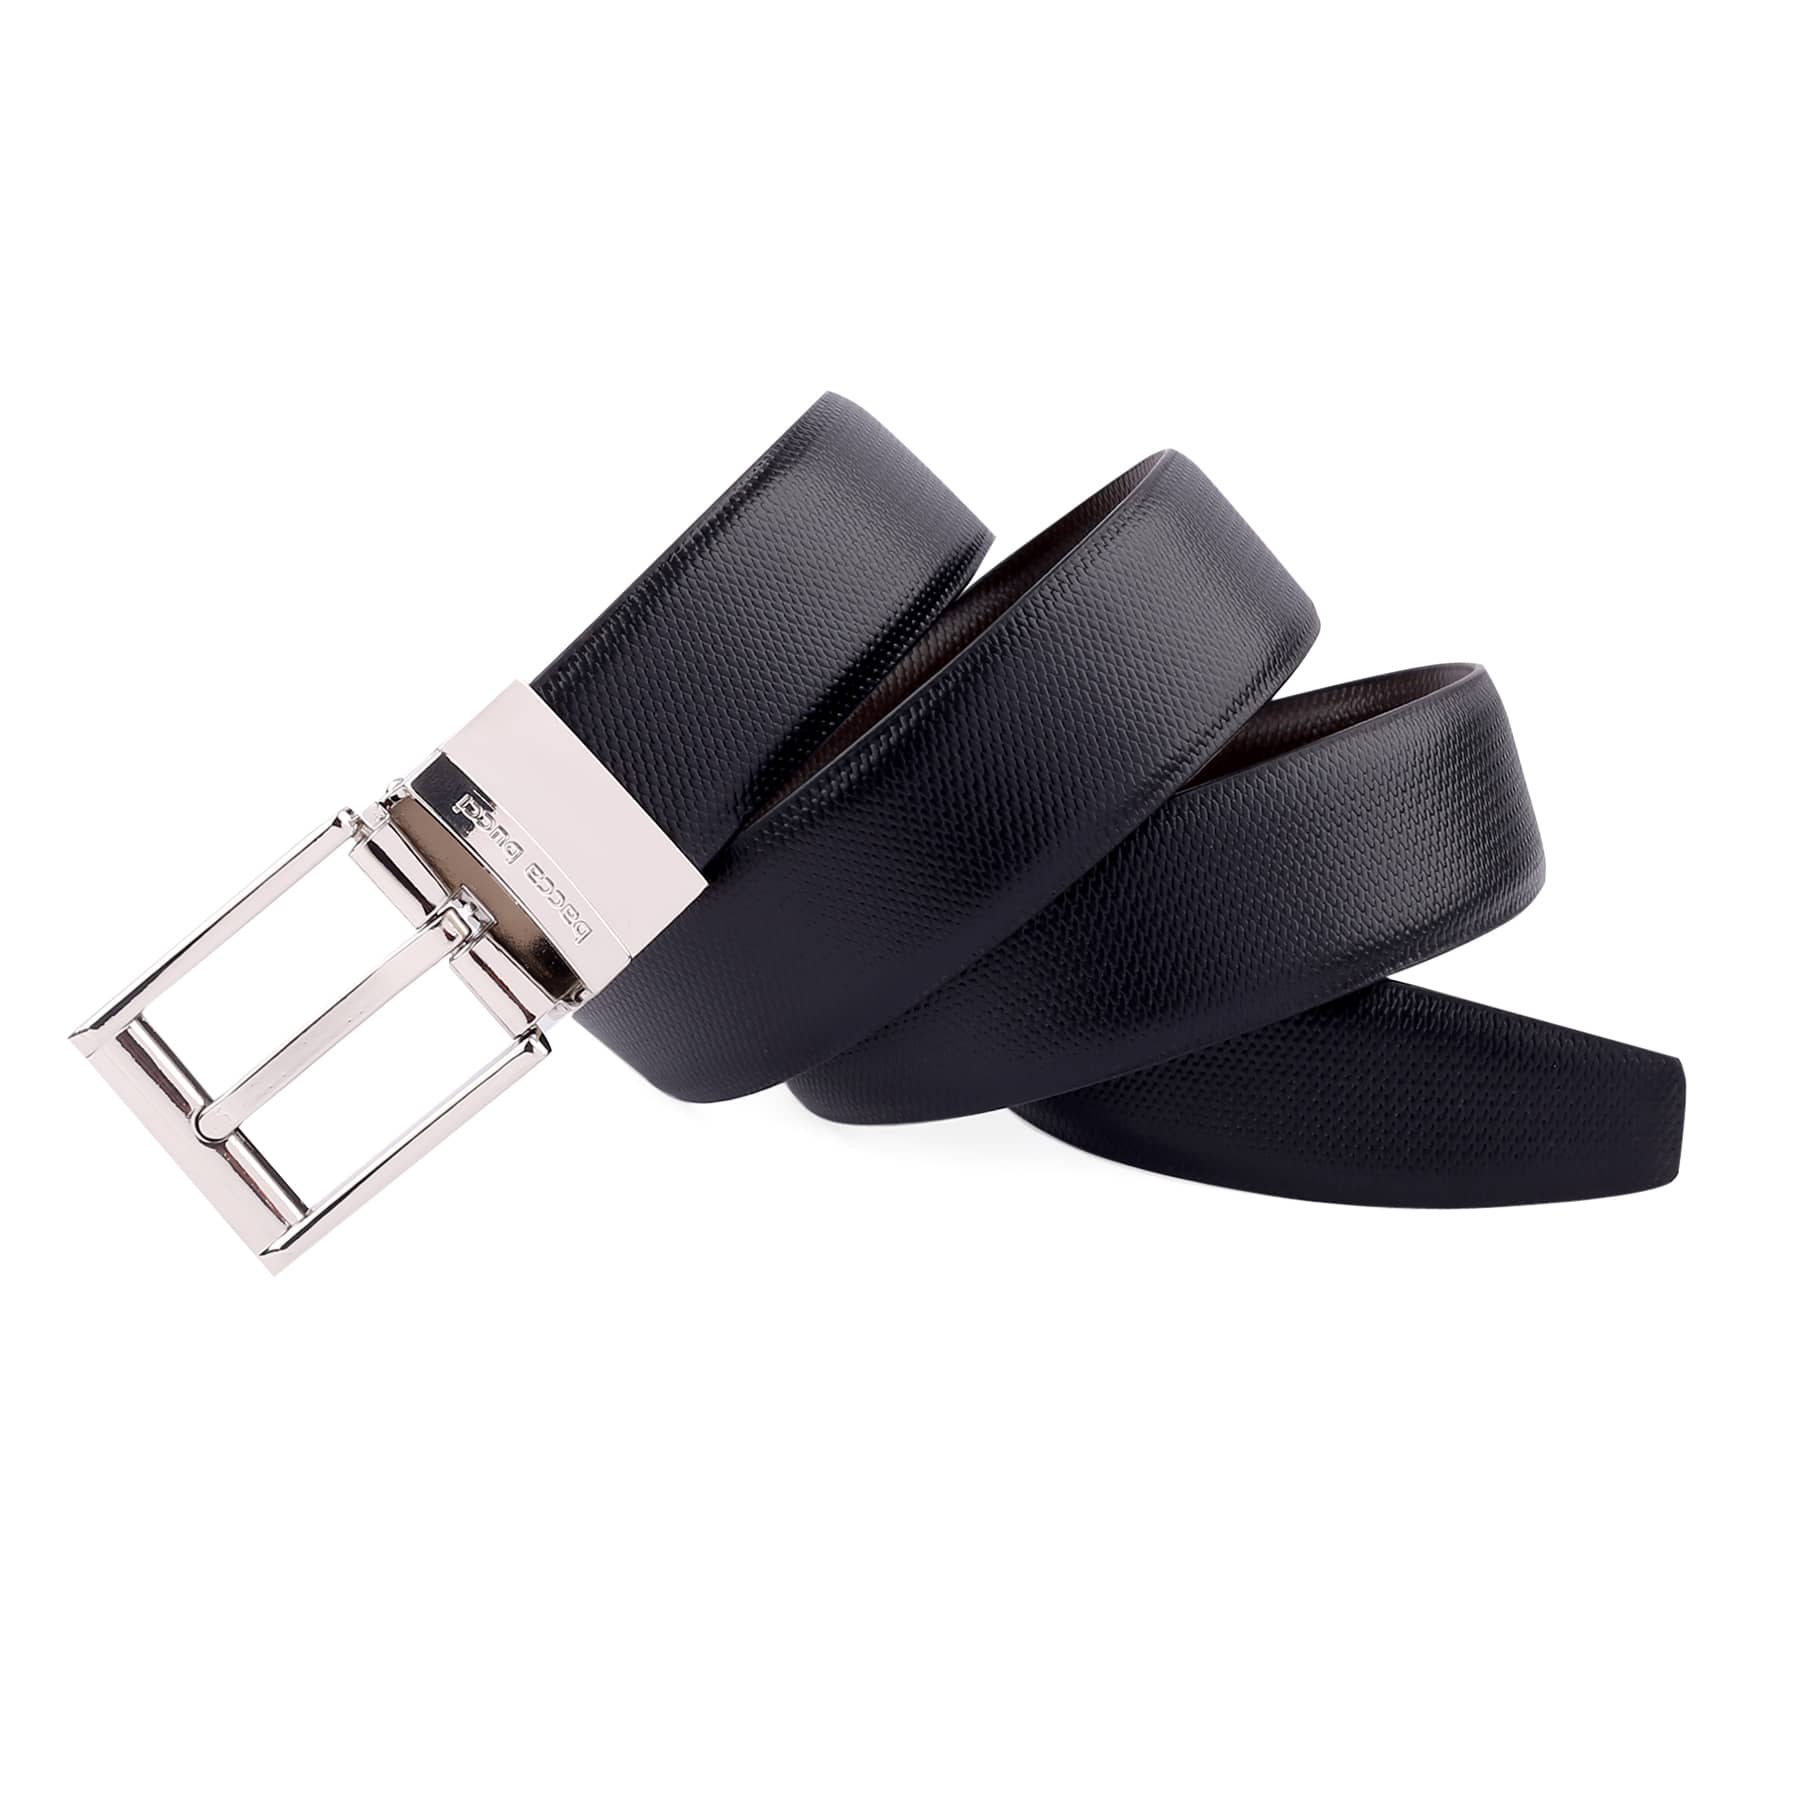 Bacca Bucci Auto reversible dress belt with Genuine Leather